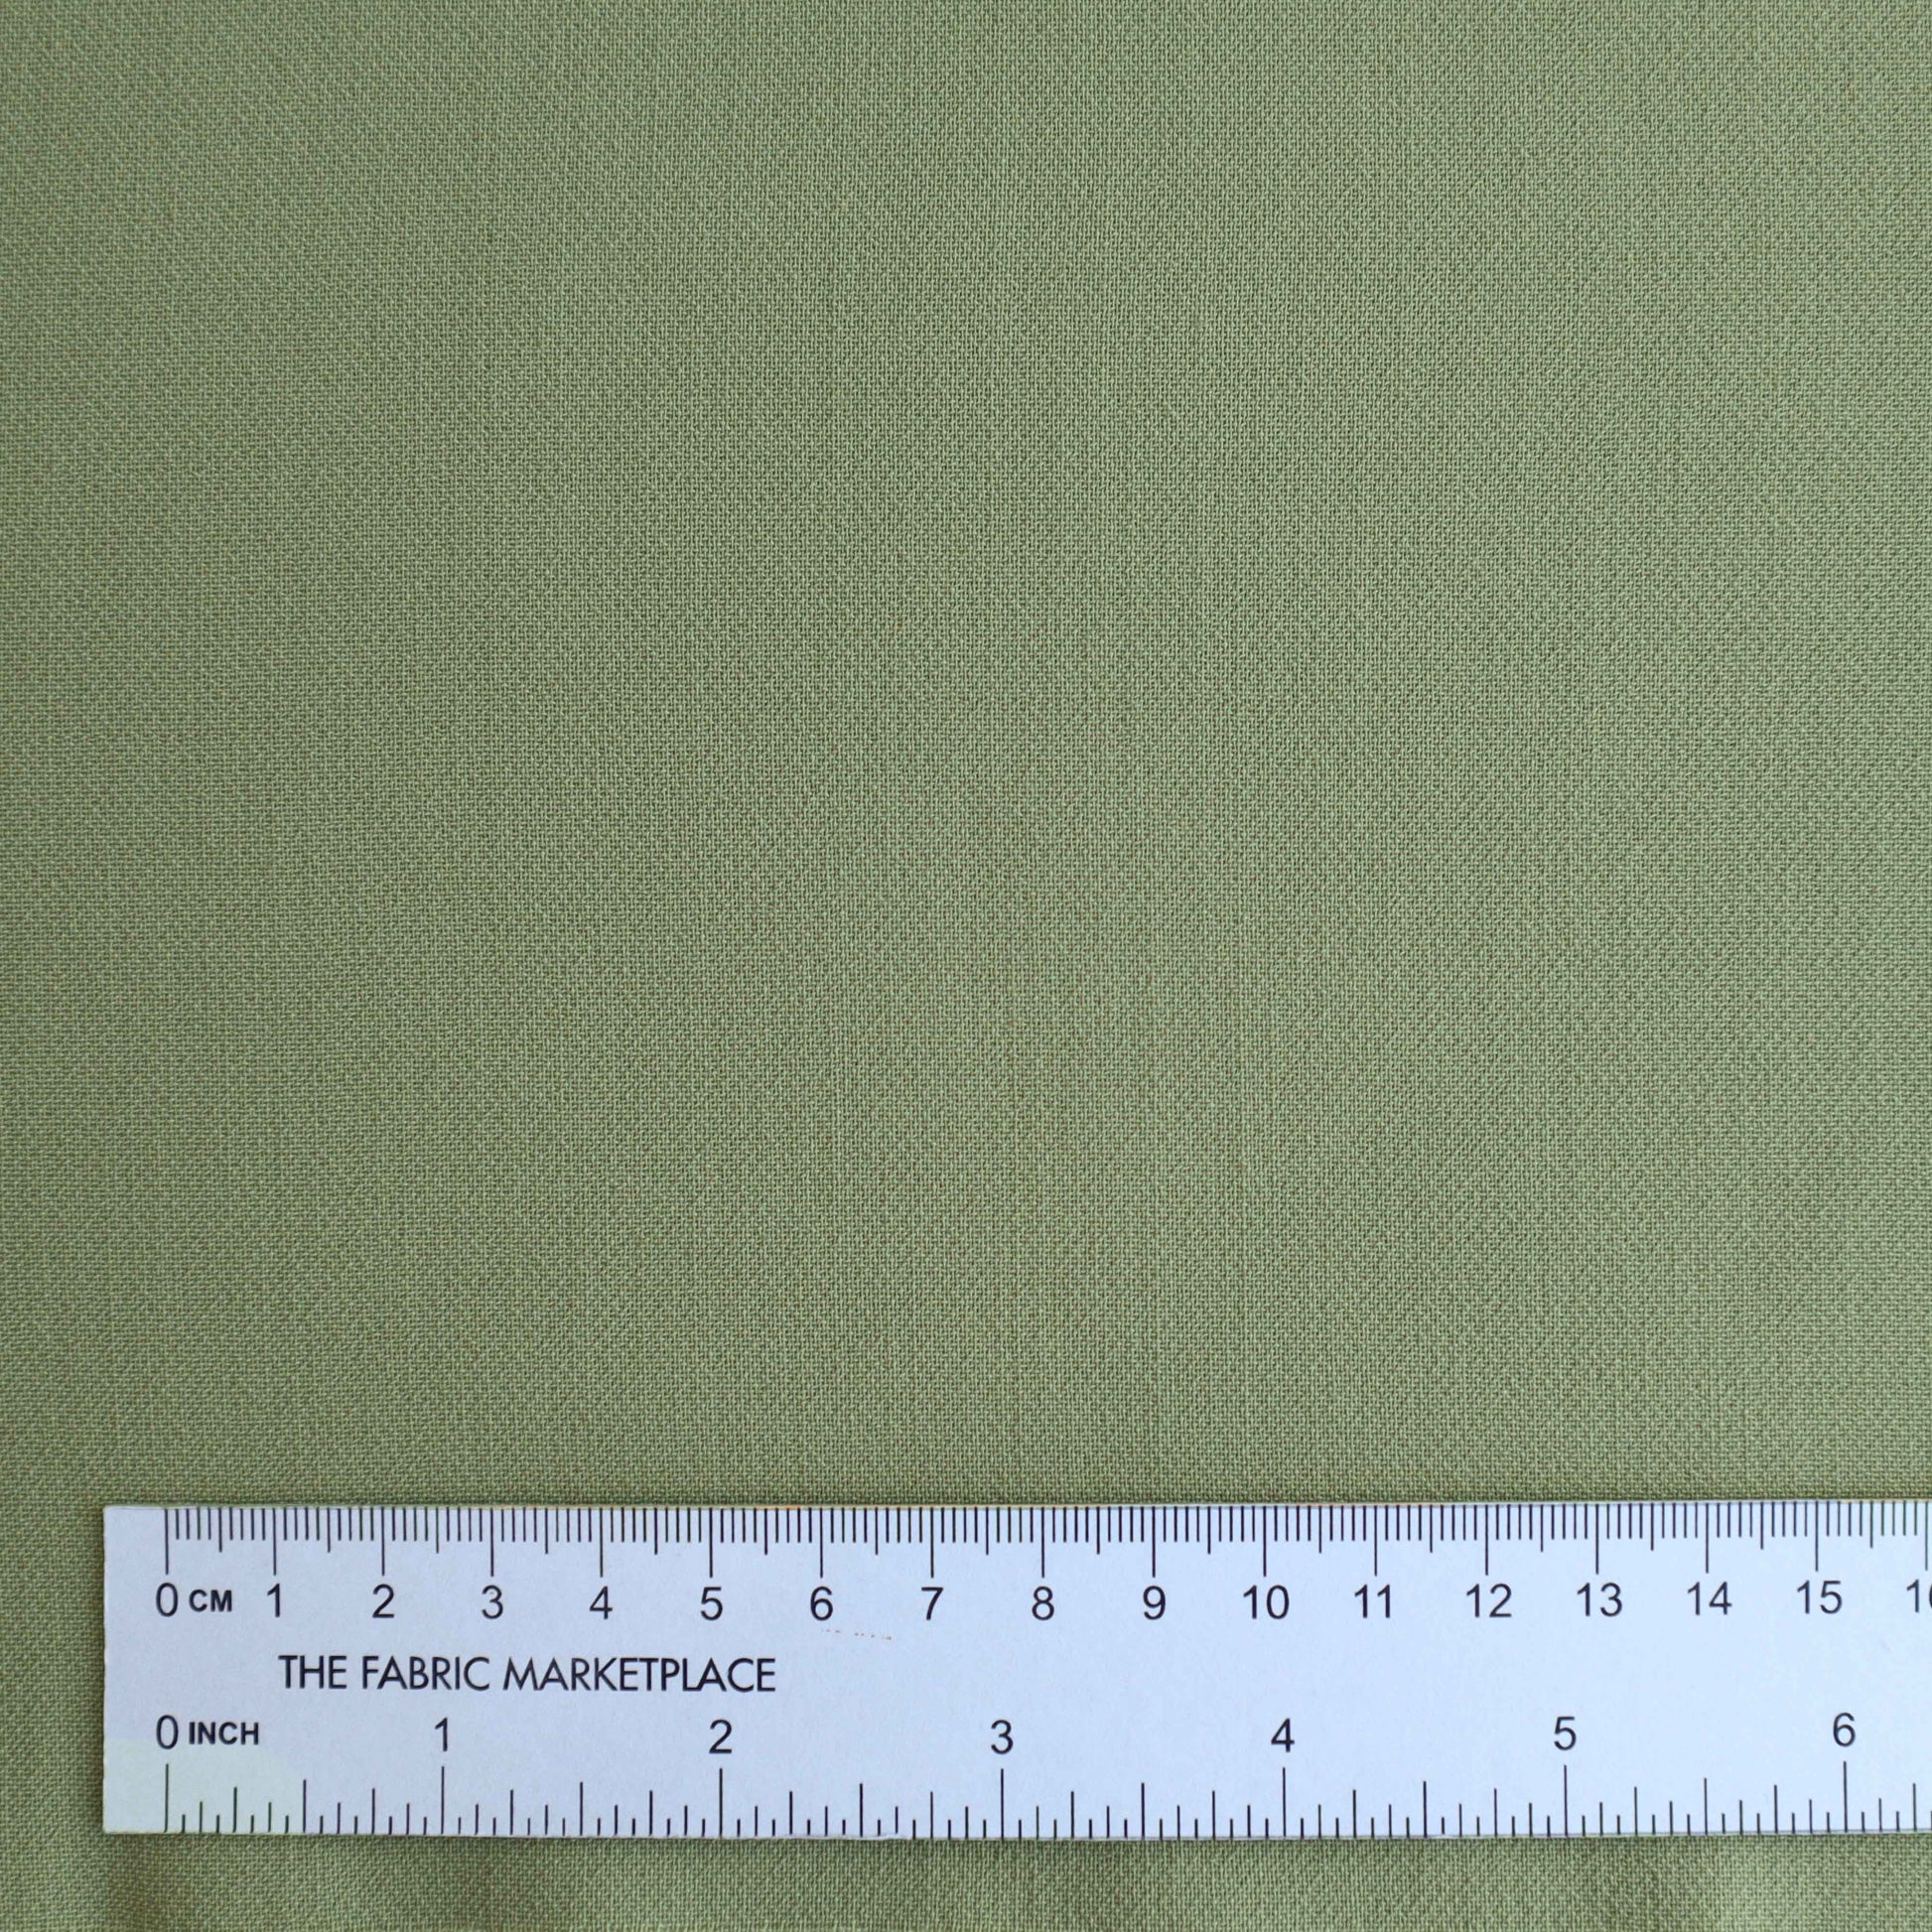 Mid-weight Viscose Spandex blend fabric in Sage. Blended with Spandex (elastane), this fabric does not limit movements when made into garments. 